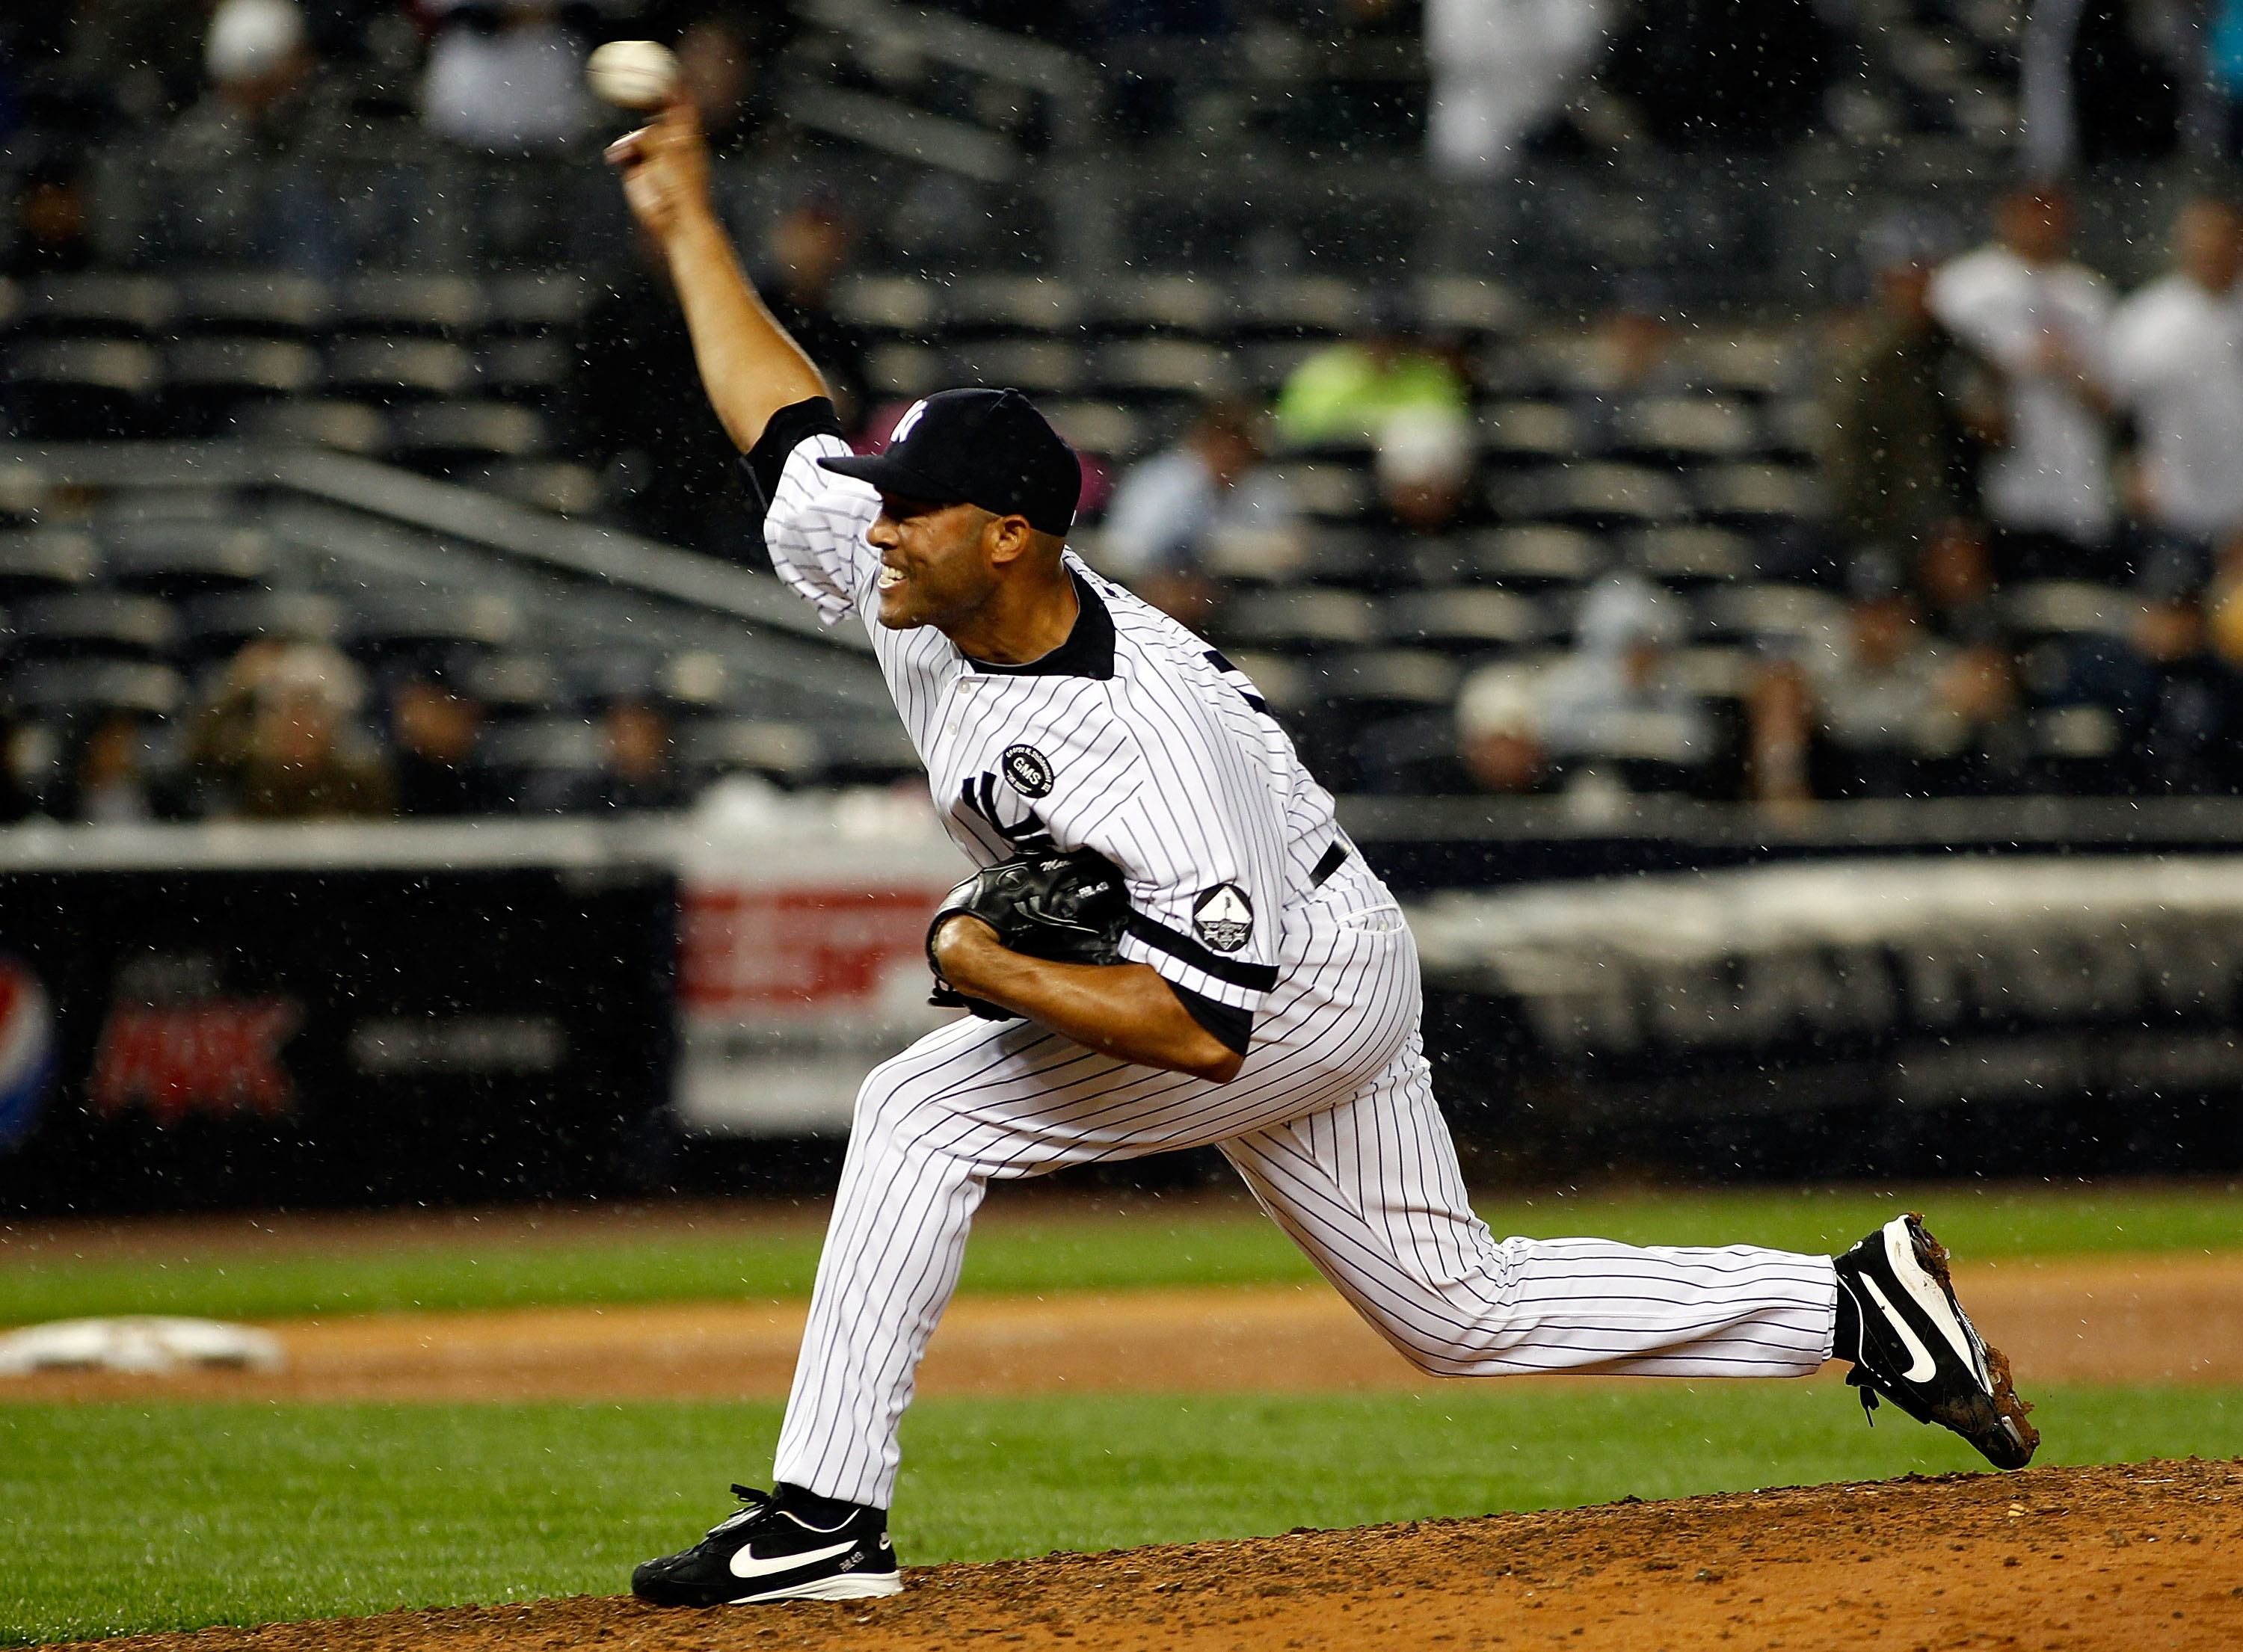 NEW YORK - SEPTEMBER 26:  Mariano Rivera #42 of the New York Yankees delivers a pitch in the ninth-inning against the Boston Red Sox on September 26, 2010 at Yankee Stadium in the Bronx borough of New York City. The Yankees won 4-3.  (Photo by Mike Stobe/